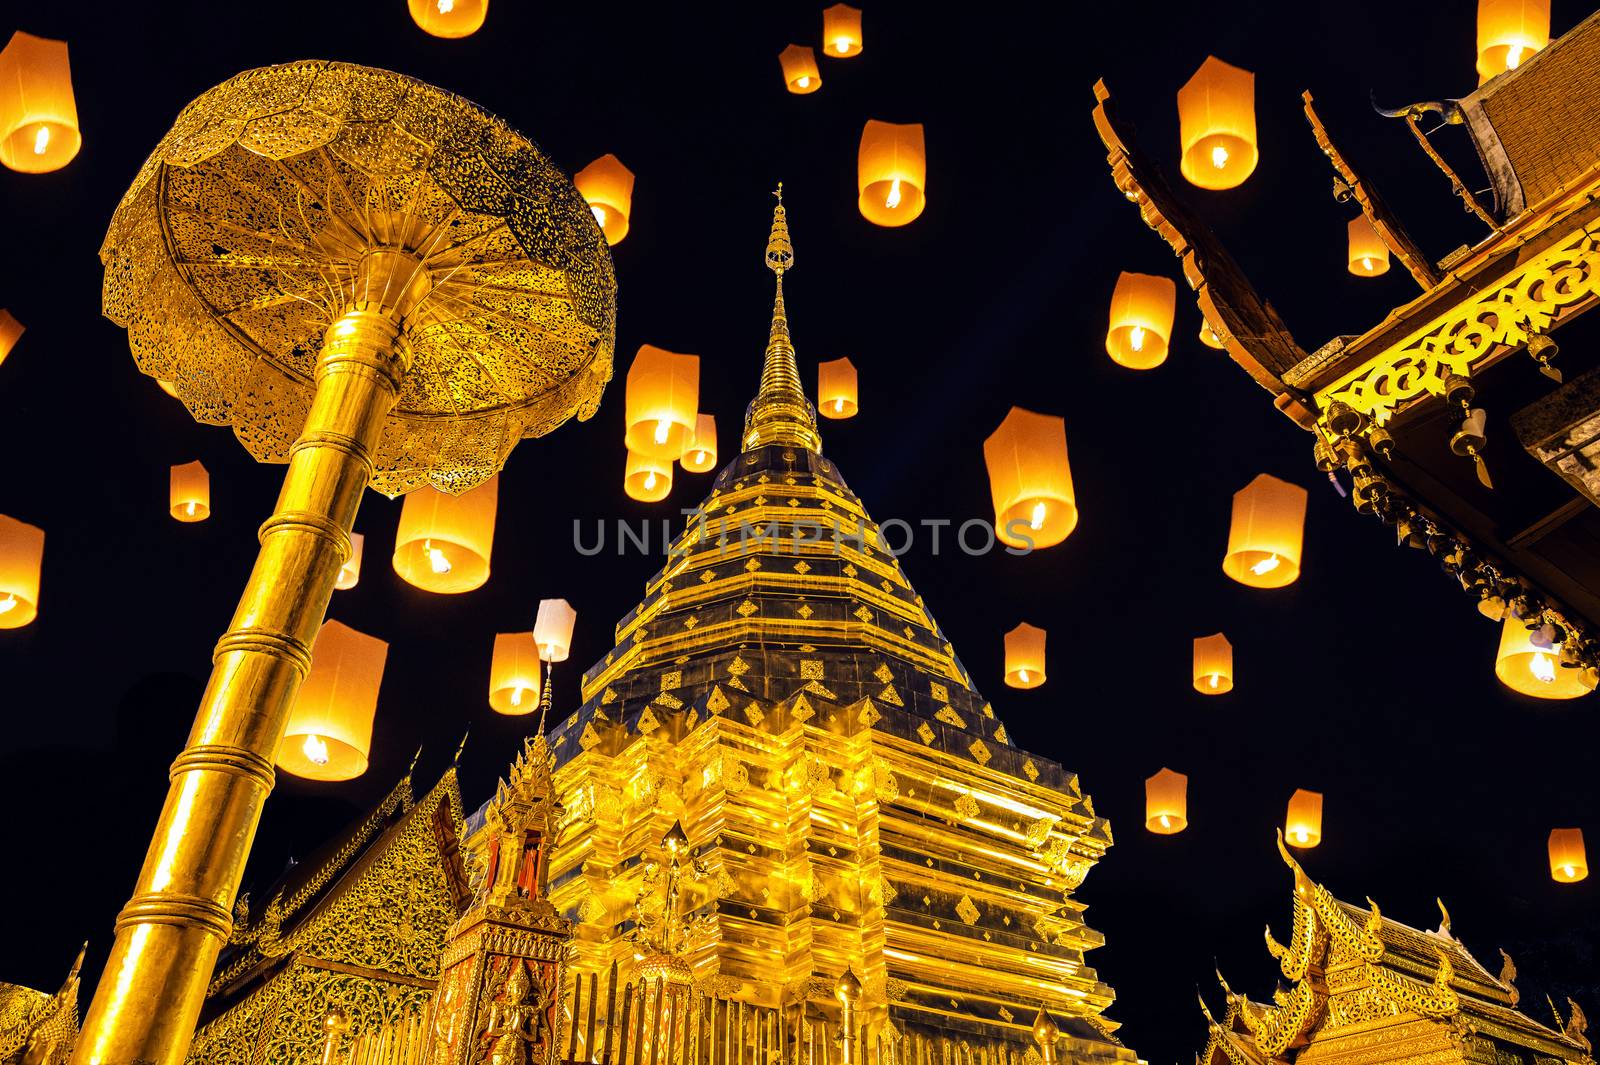 Yee peng festival and sky lanterns at Wat Phra That Doi Suthep in Chiang Mai, Thailand. by gutarphotoghaphy